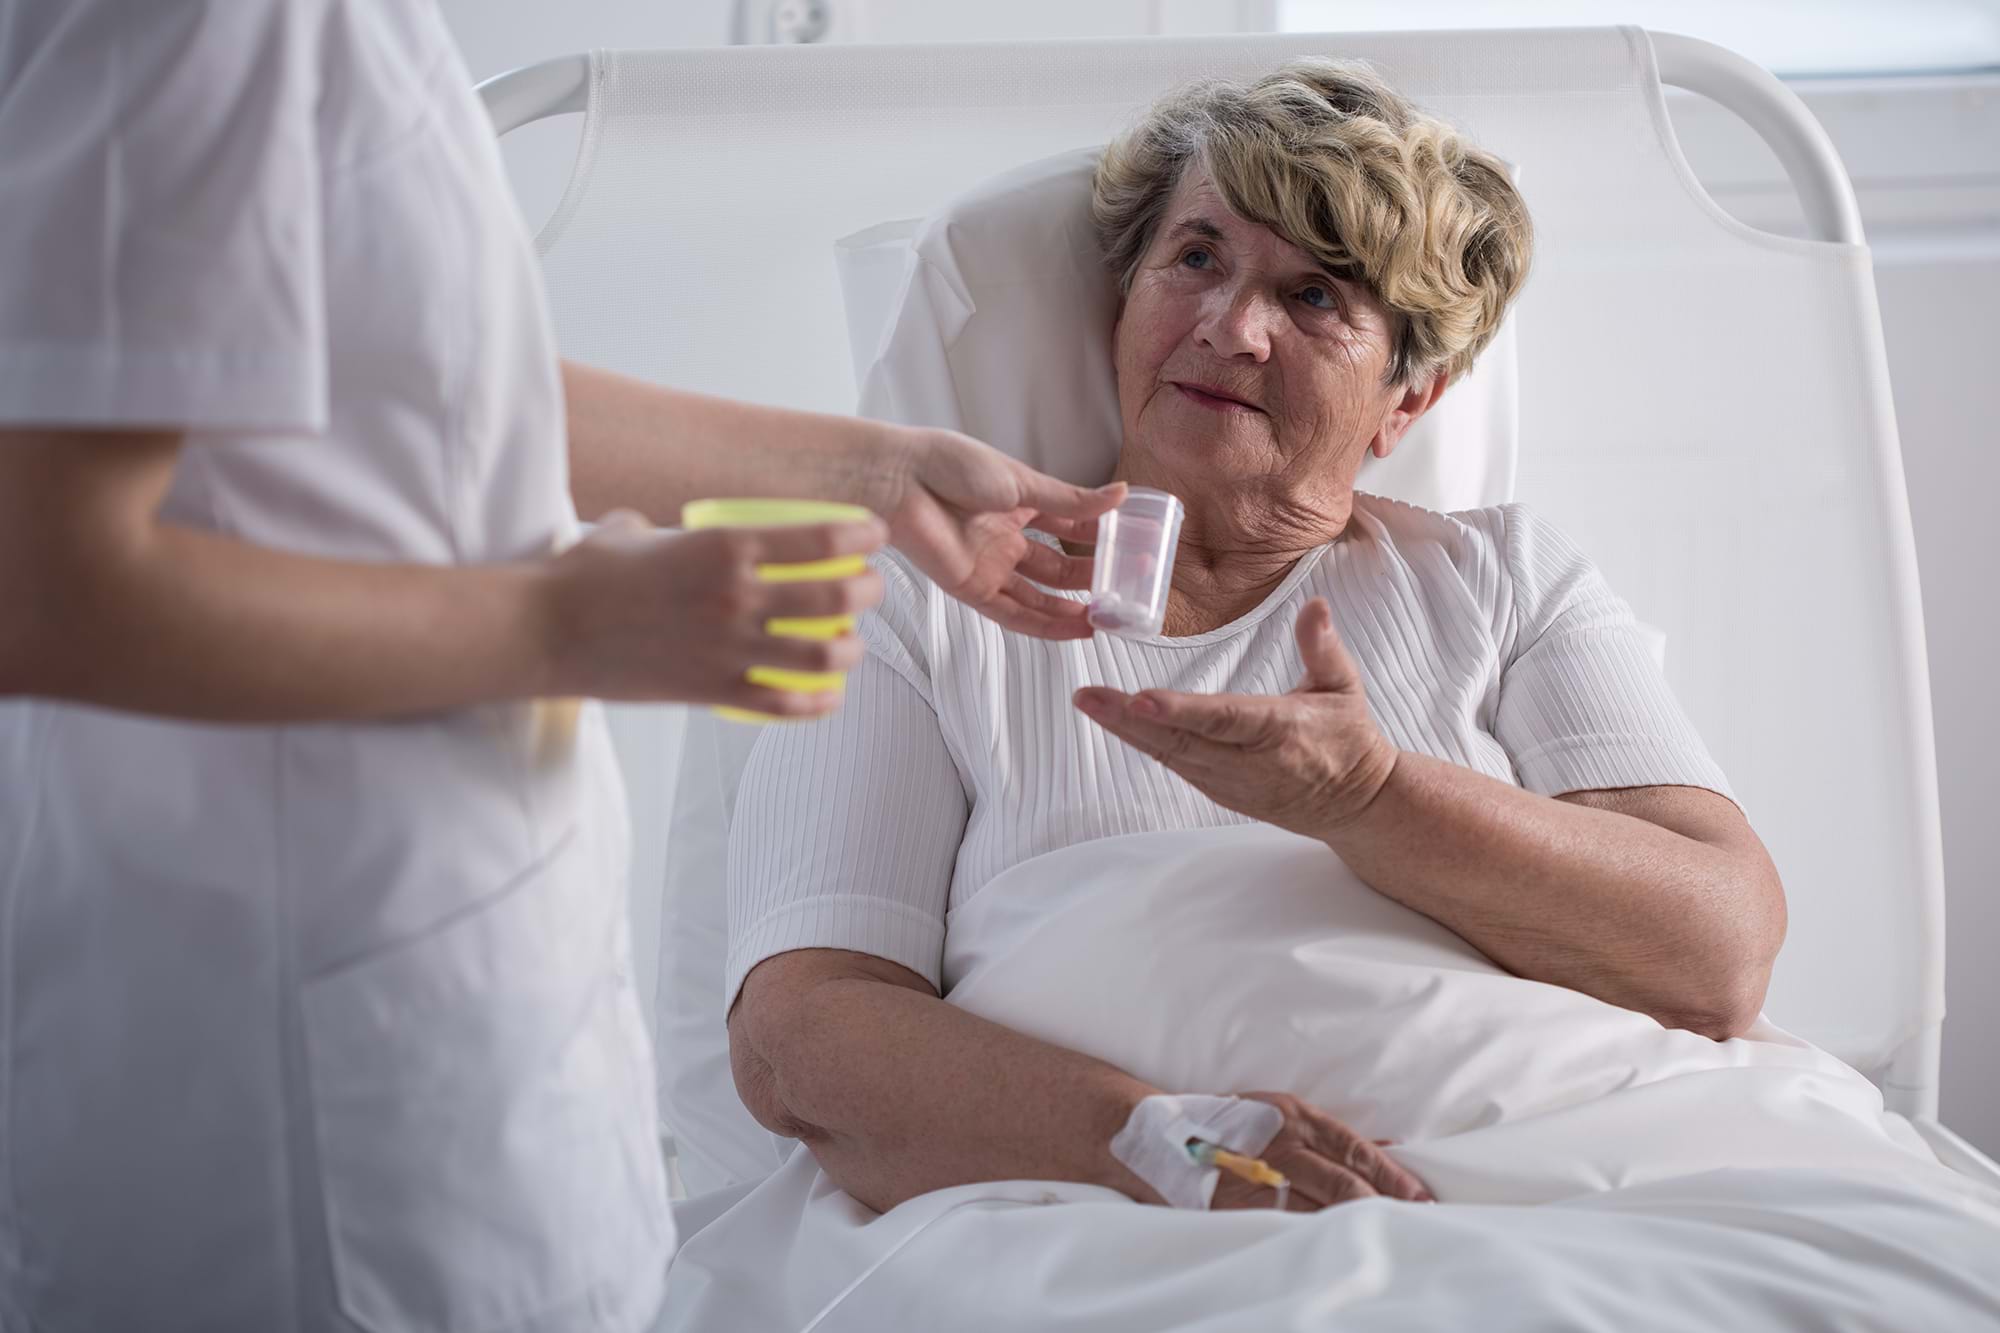 A woman being handed medication in a hospital bed